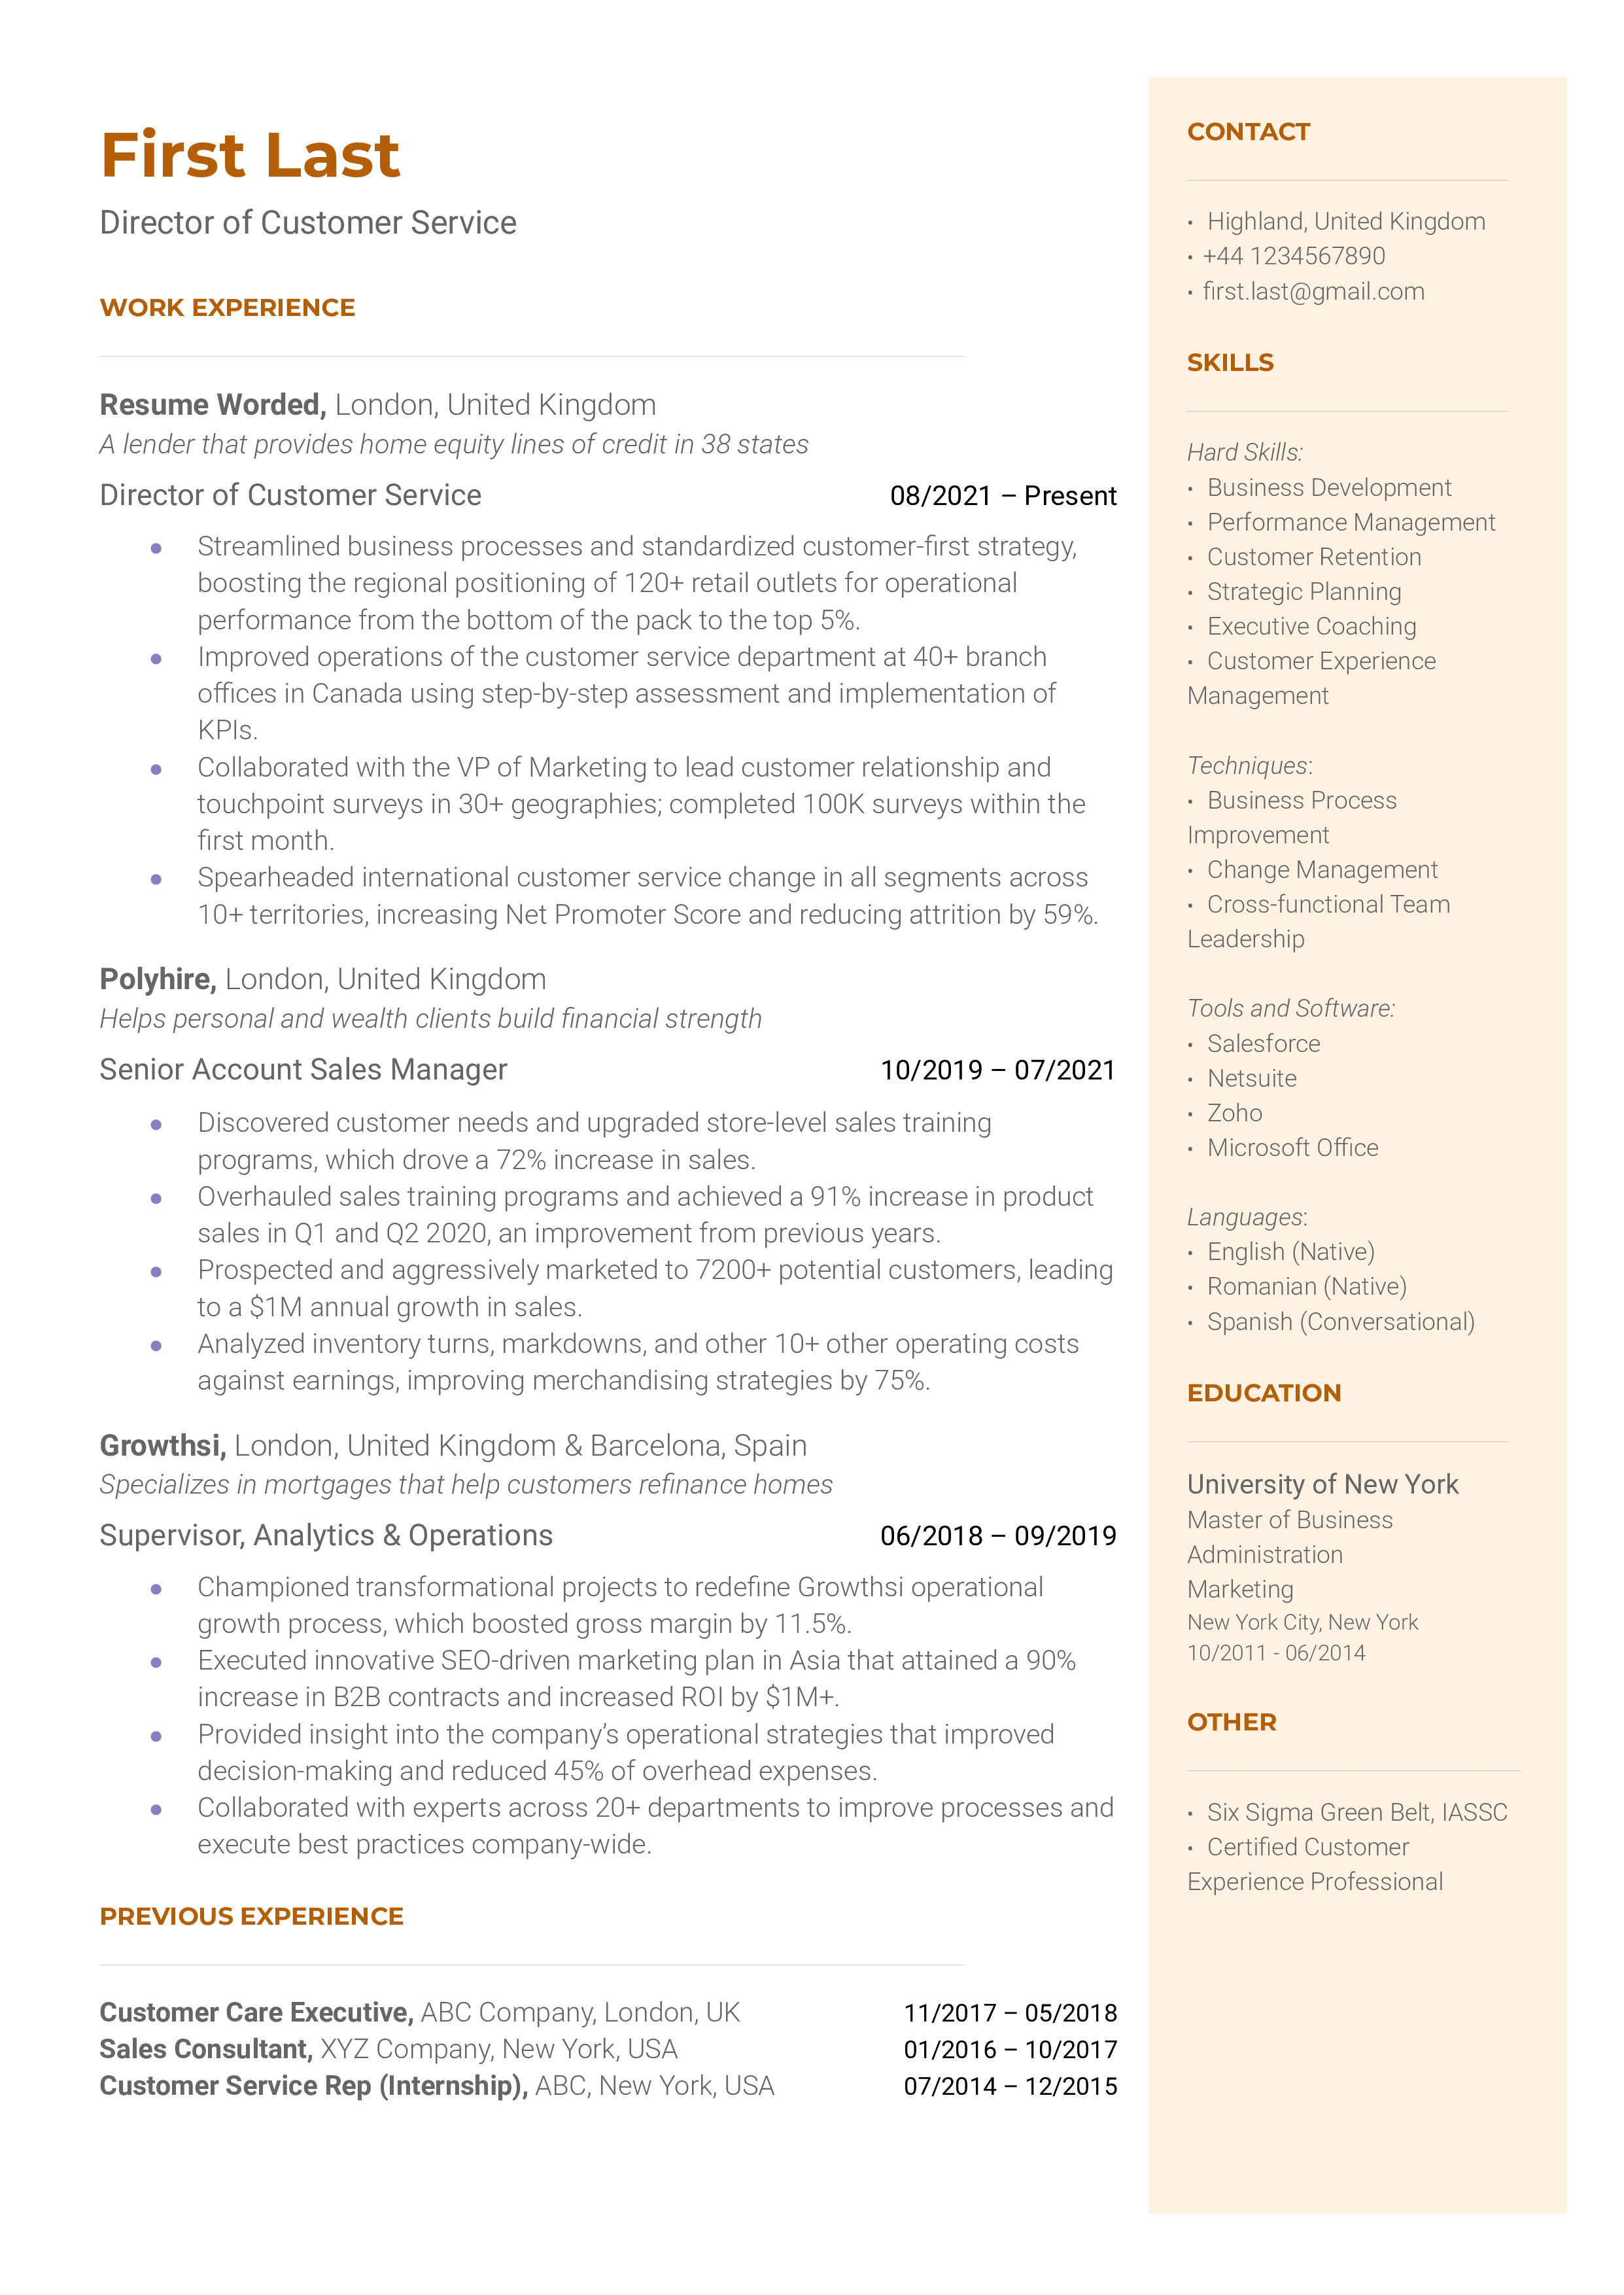 A resume for a customer service director with a bachelor's degree in business and experience as a customer service manager.